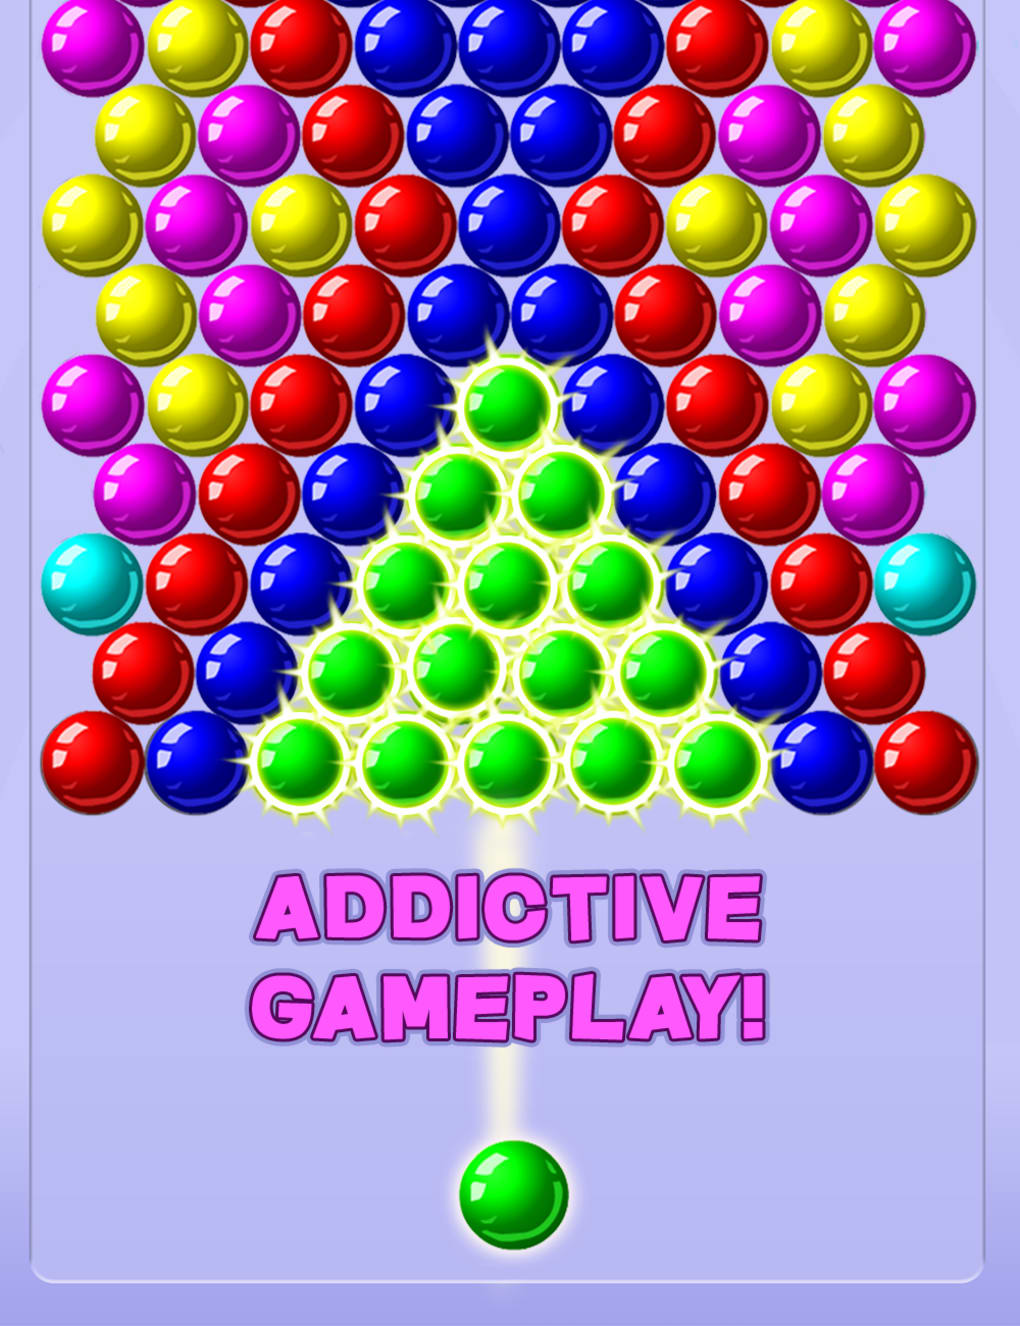 Bubble Shooter APK for Android - Latest Version (Free Download)